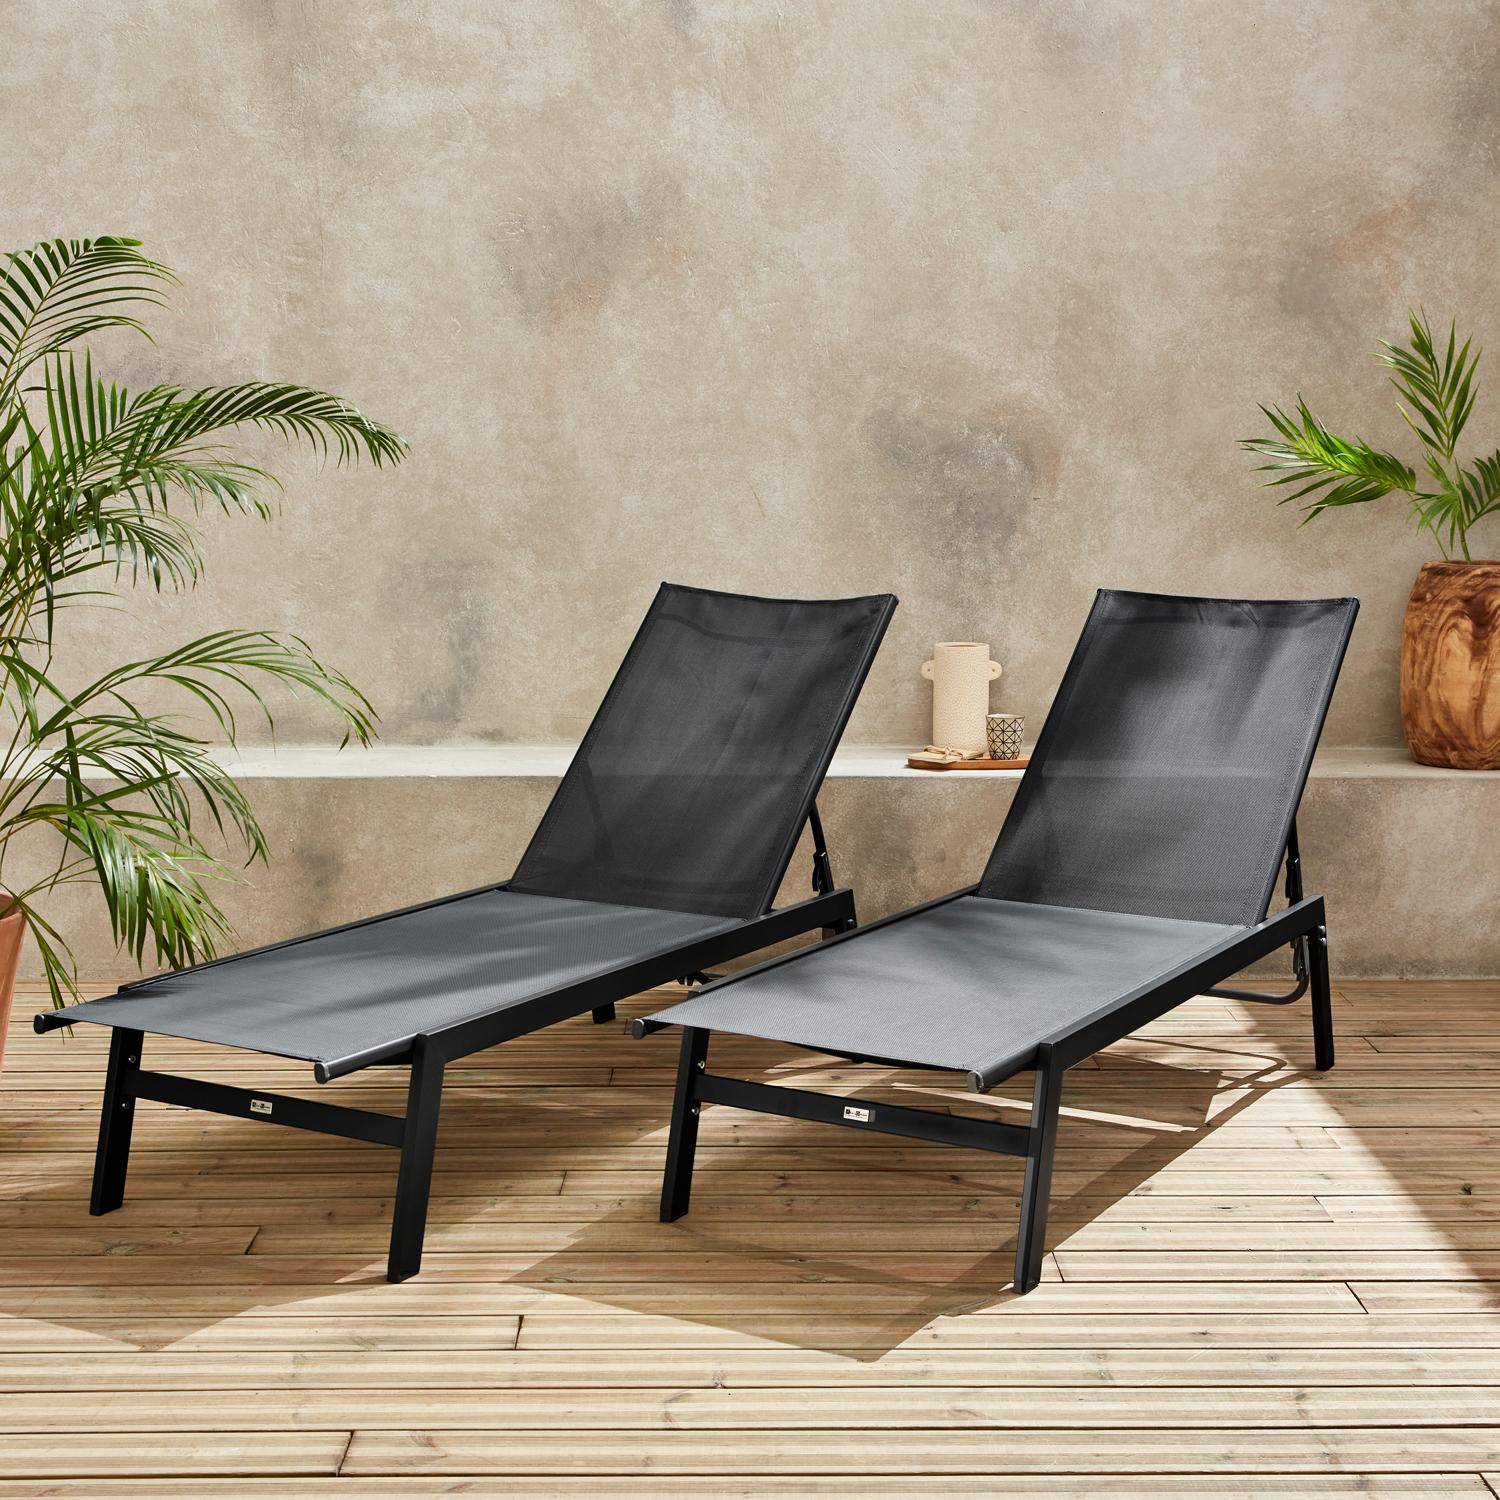 Pair of Textilene and Metal Multi-Position Sun Loungers, Black Photo1